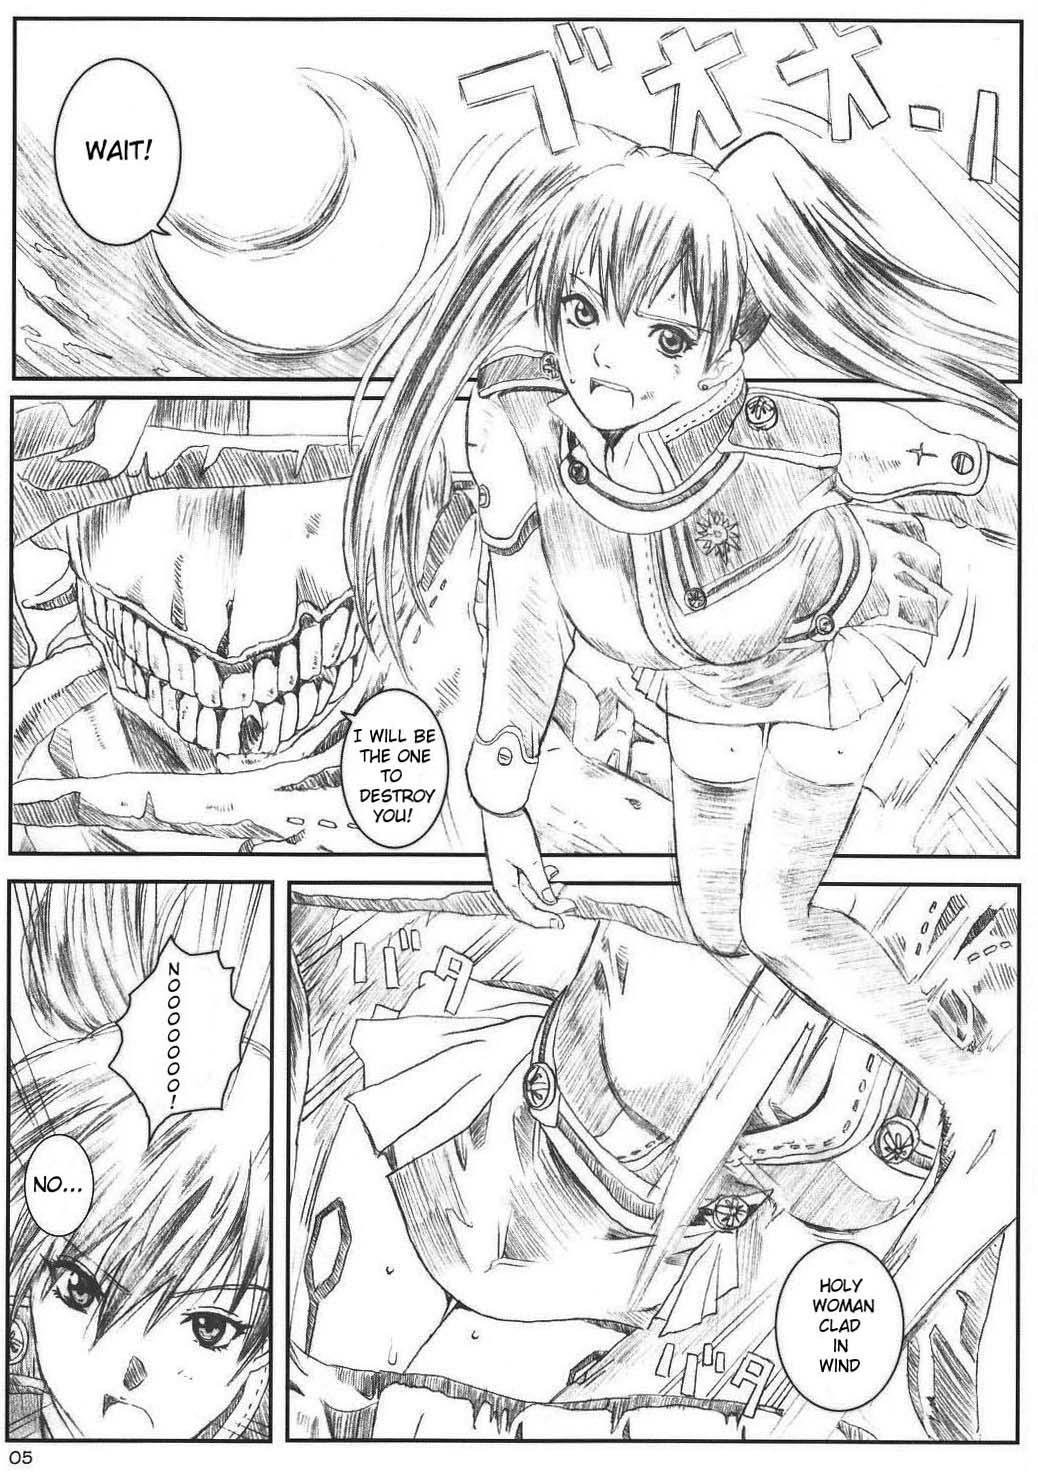 Sis Innocence - D.gray man Solo Girl - Page 4